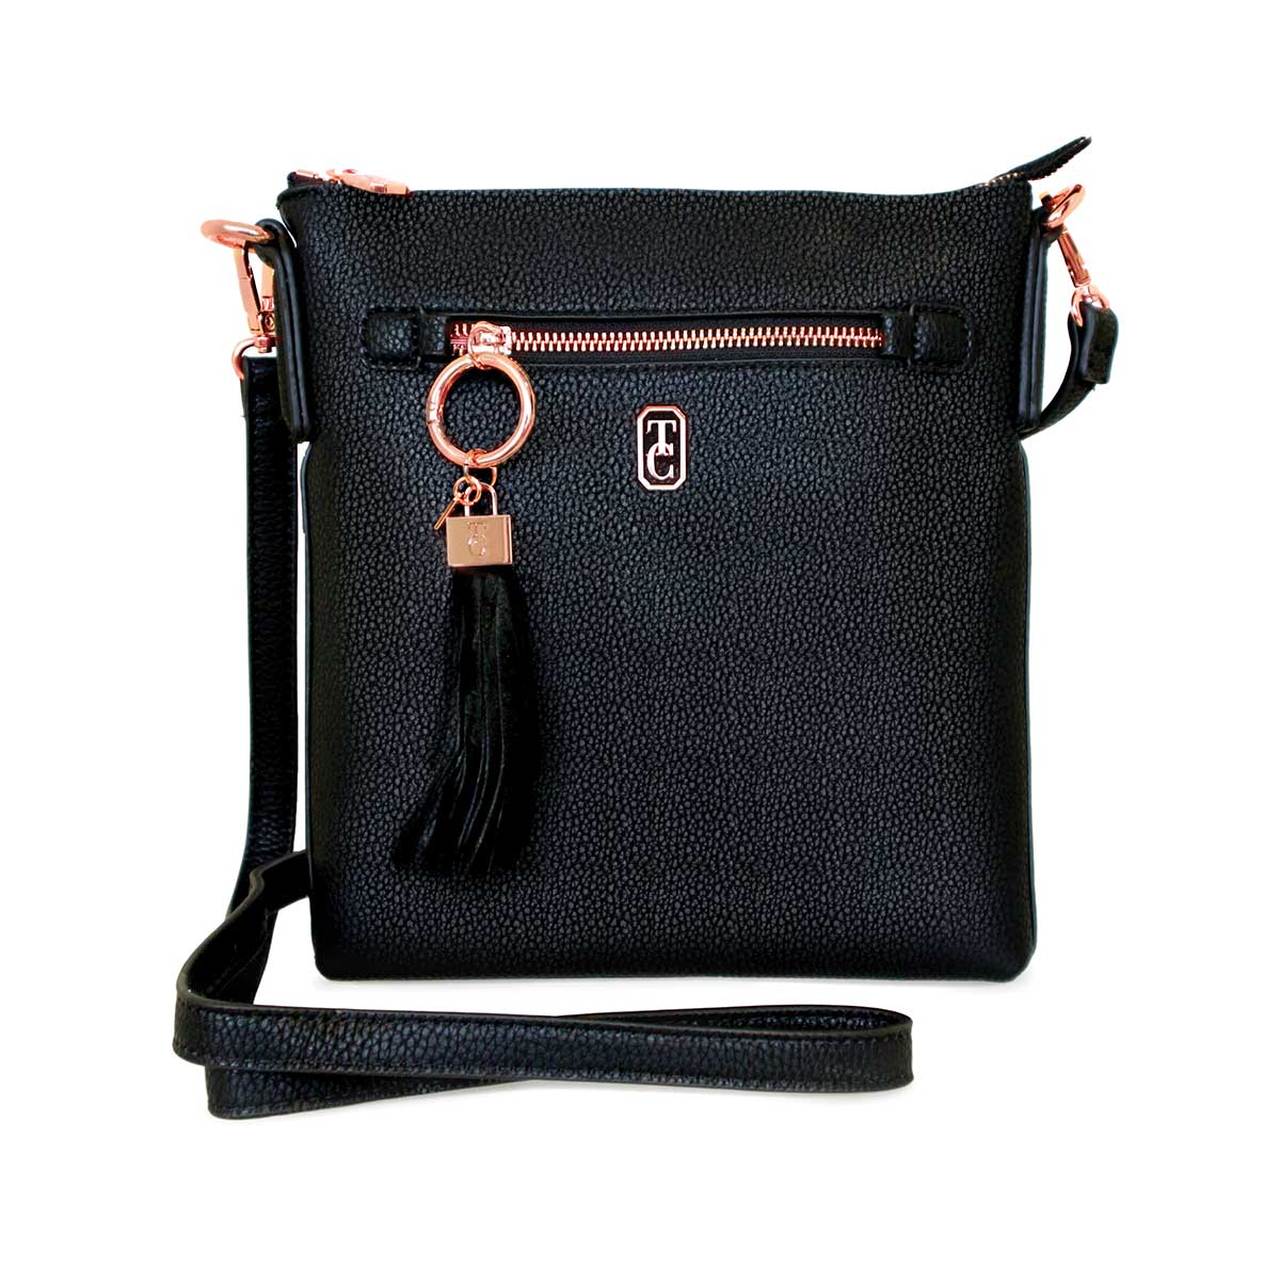 Tipperary Crystal The Chelsea Cross Body Pouch Black  The versatile and trendy Chelsea can be worn as a cross body and also over the shoulder. The Chelsea has an adjustable strap and easily accessible outside pocket and secure front zip pocket. Metal hardware detail finish off this stylish bag in rose gold or yellow gold.